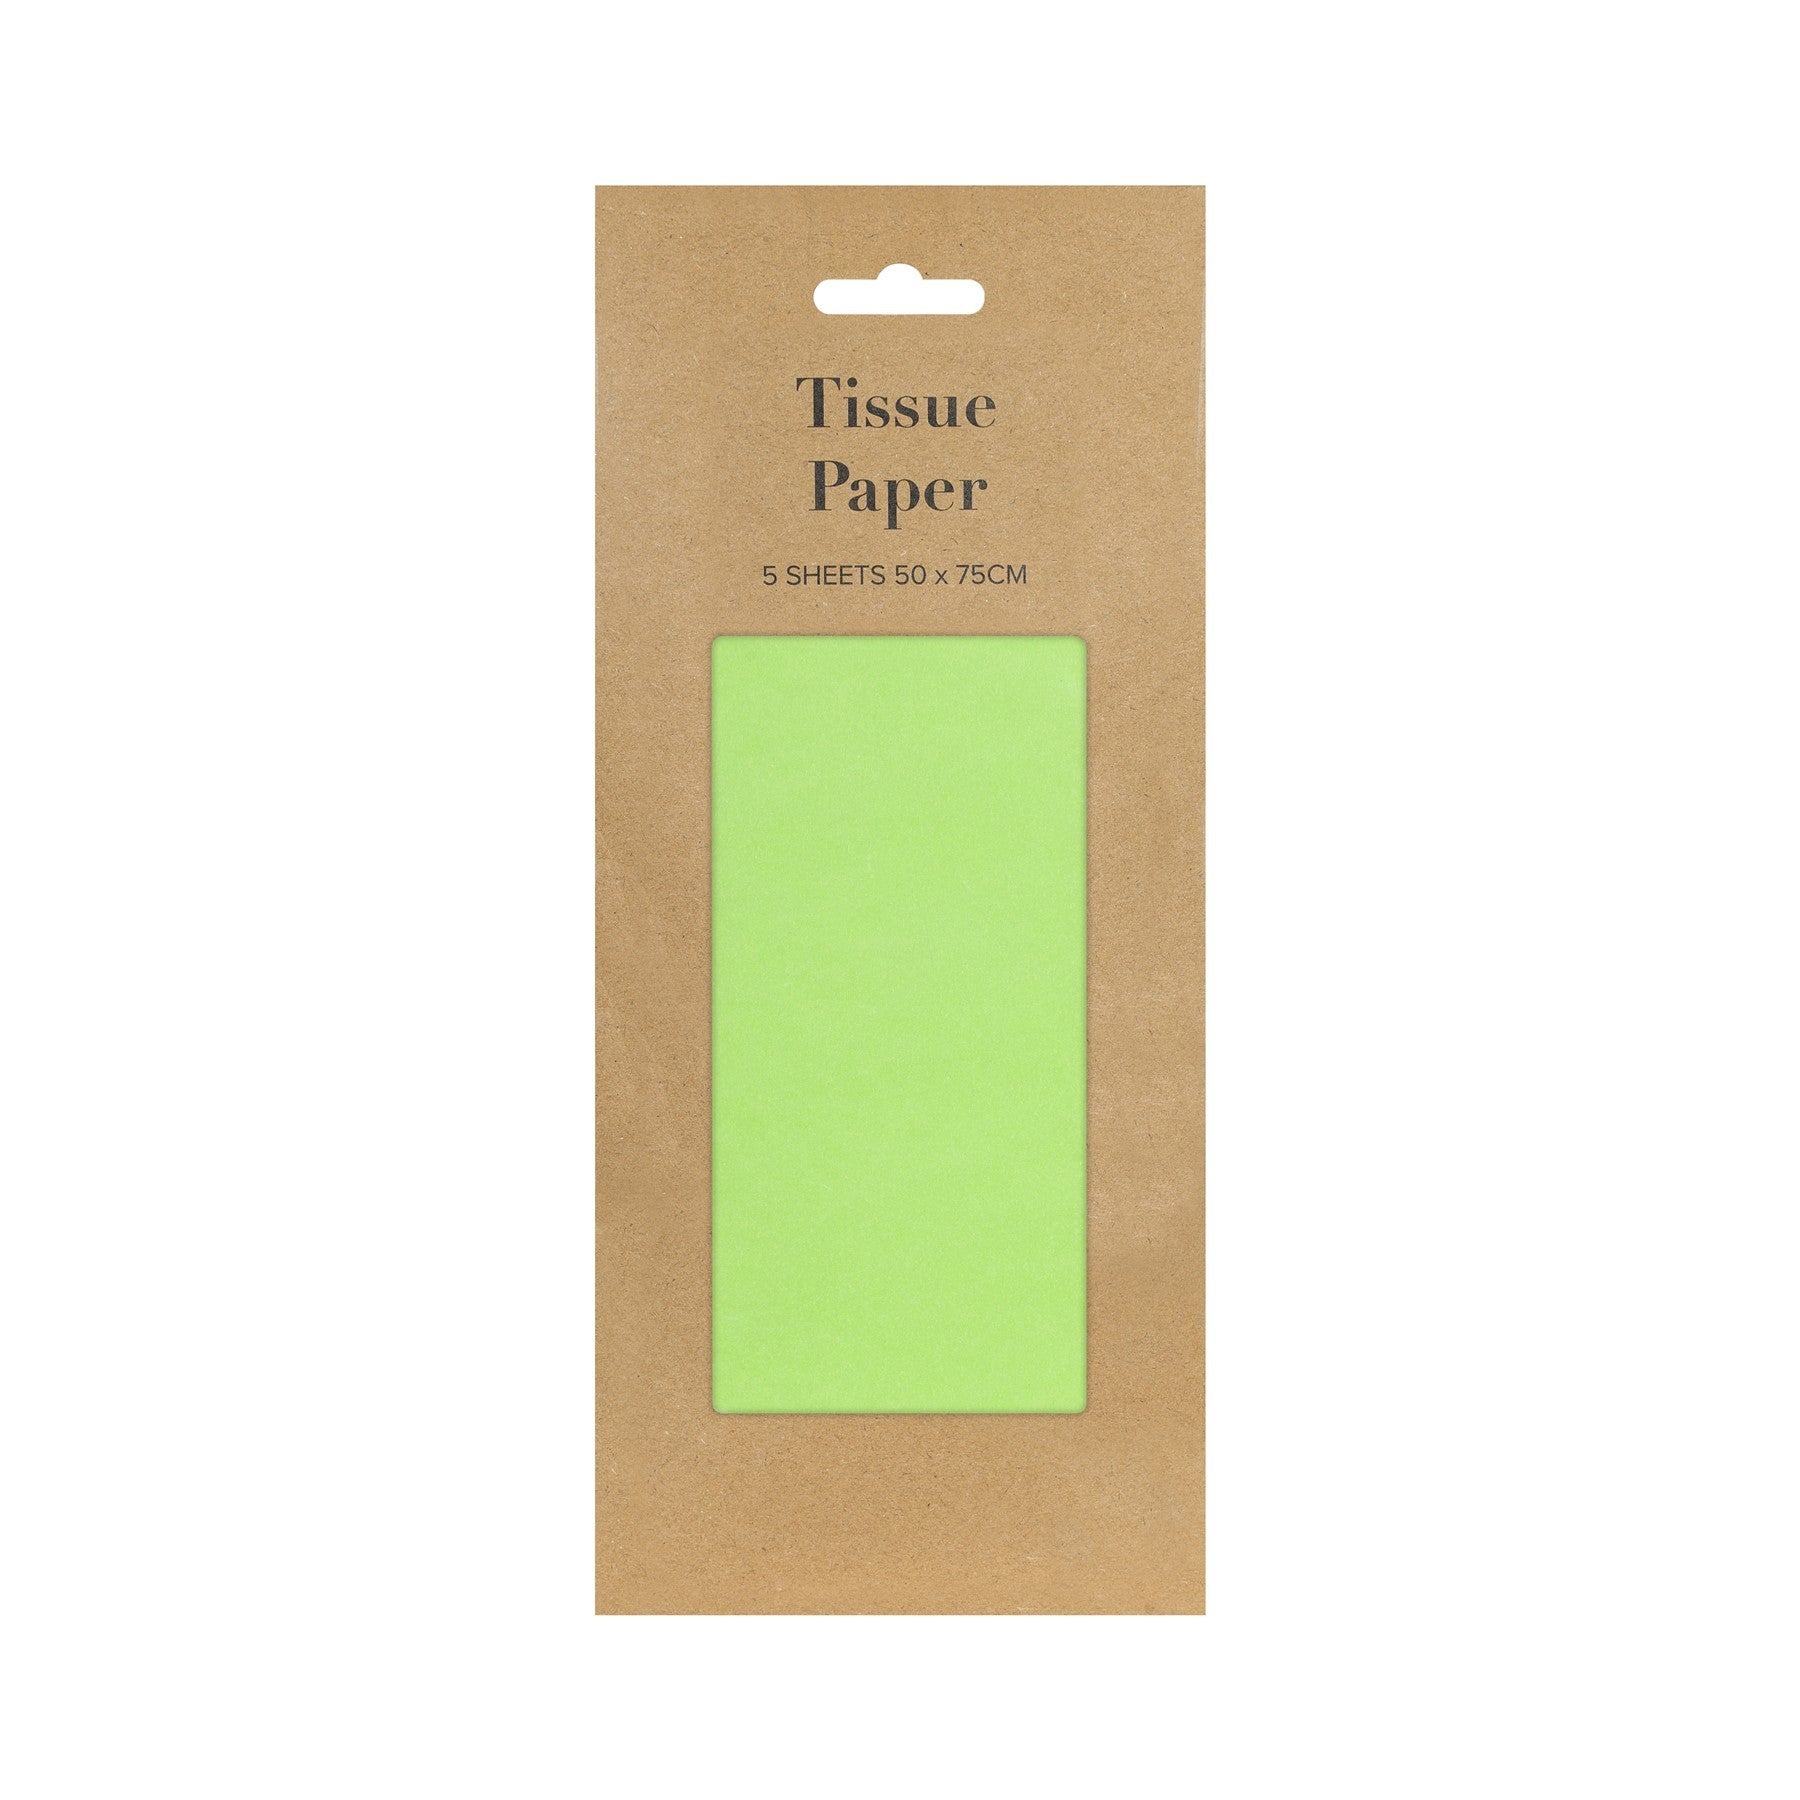 View Lime Green Tissue Paper Pack 5 Sheets information